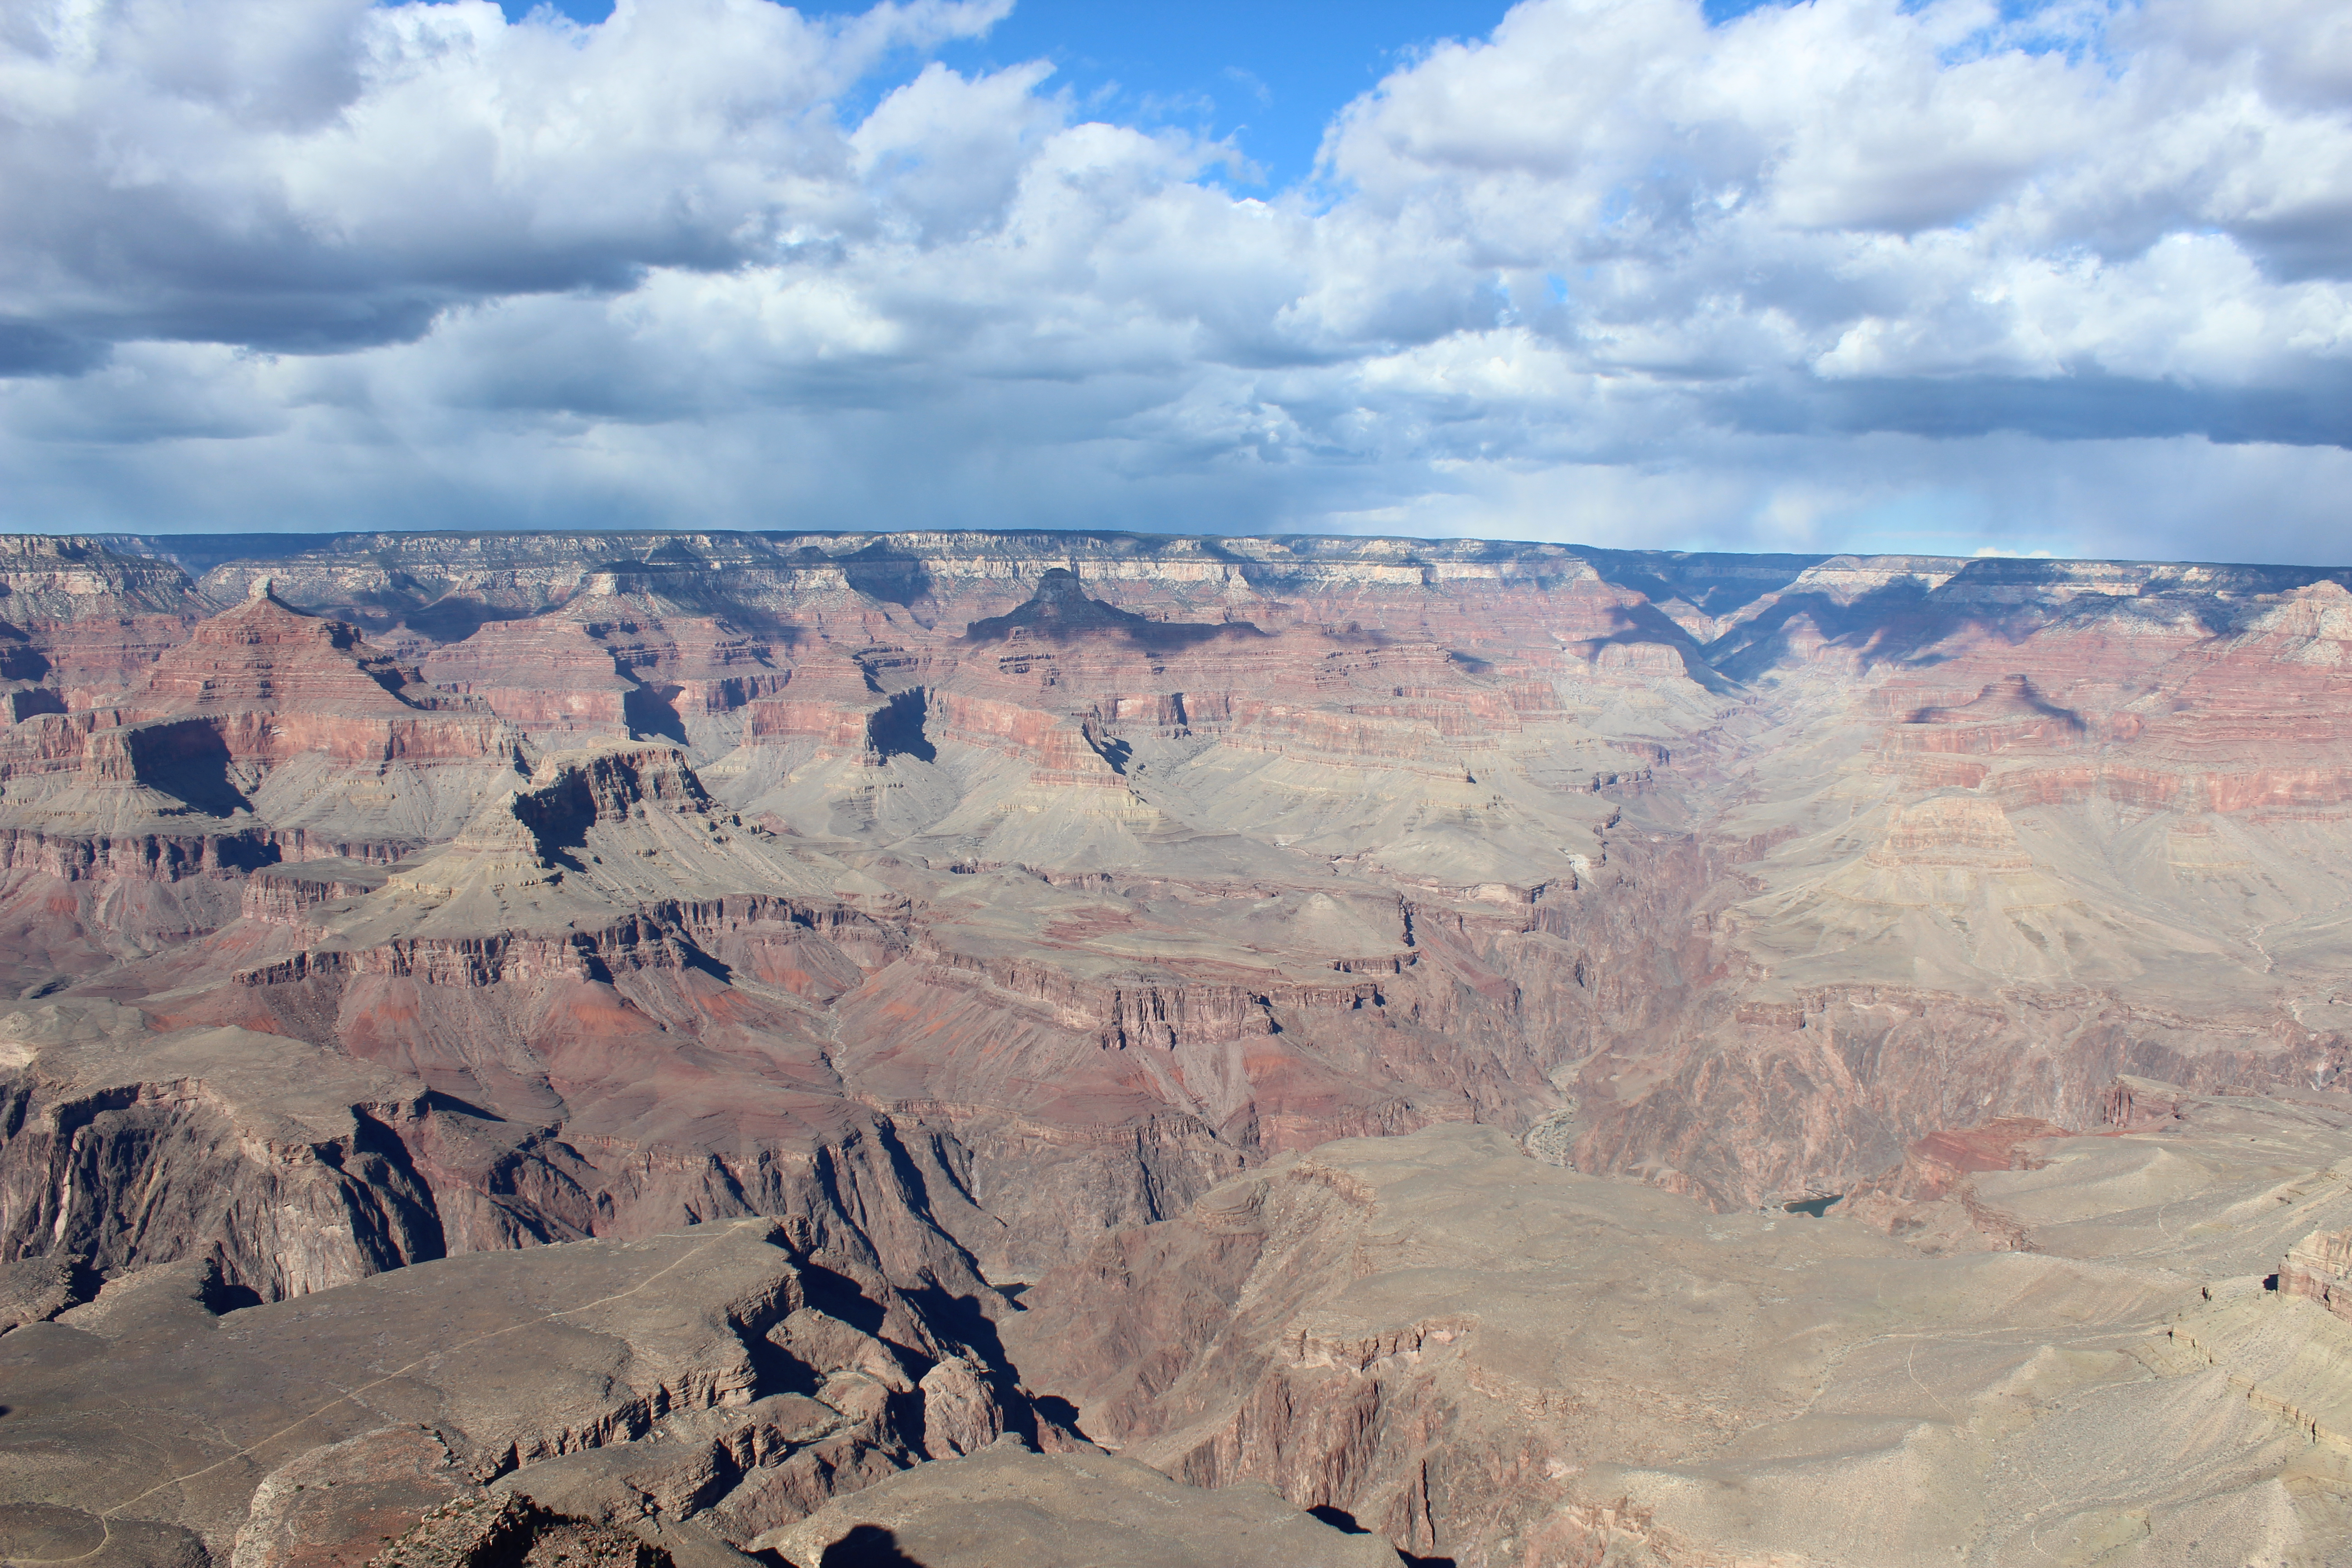 Arizona and the Grand Canyon – Unit Study Resources